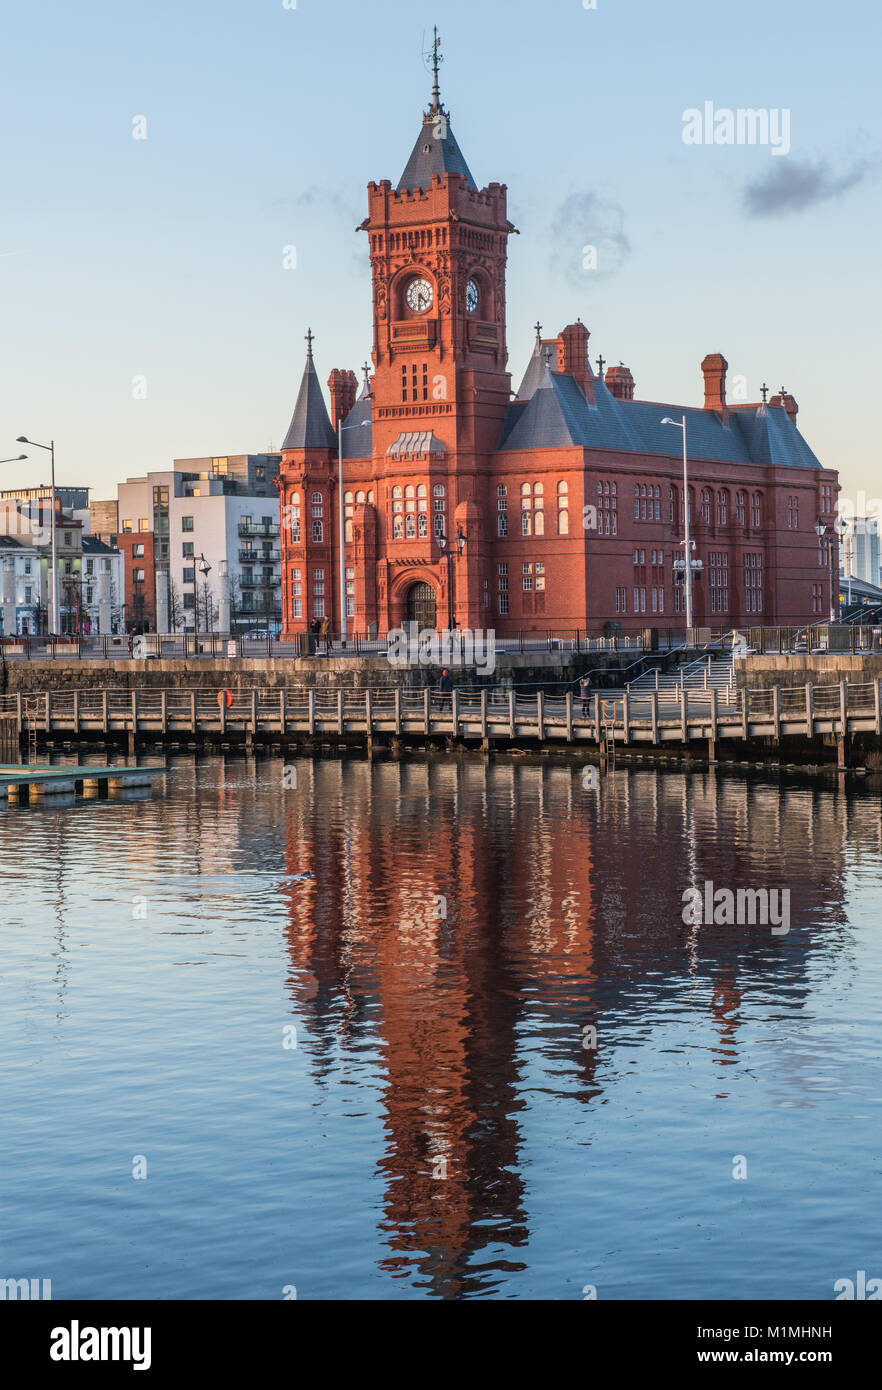 The Pierhead Building at Cardiff Bay, south Wales Stock Photo